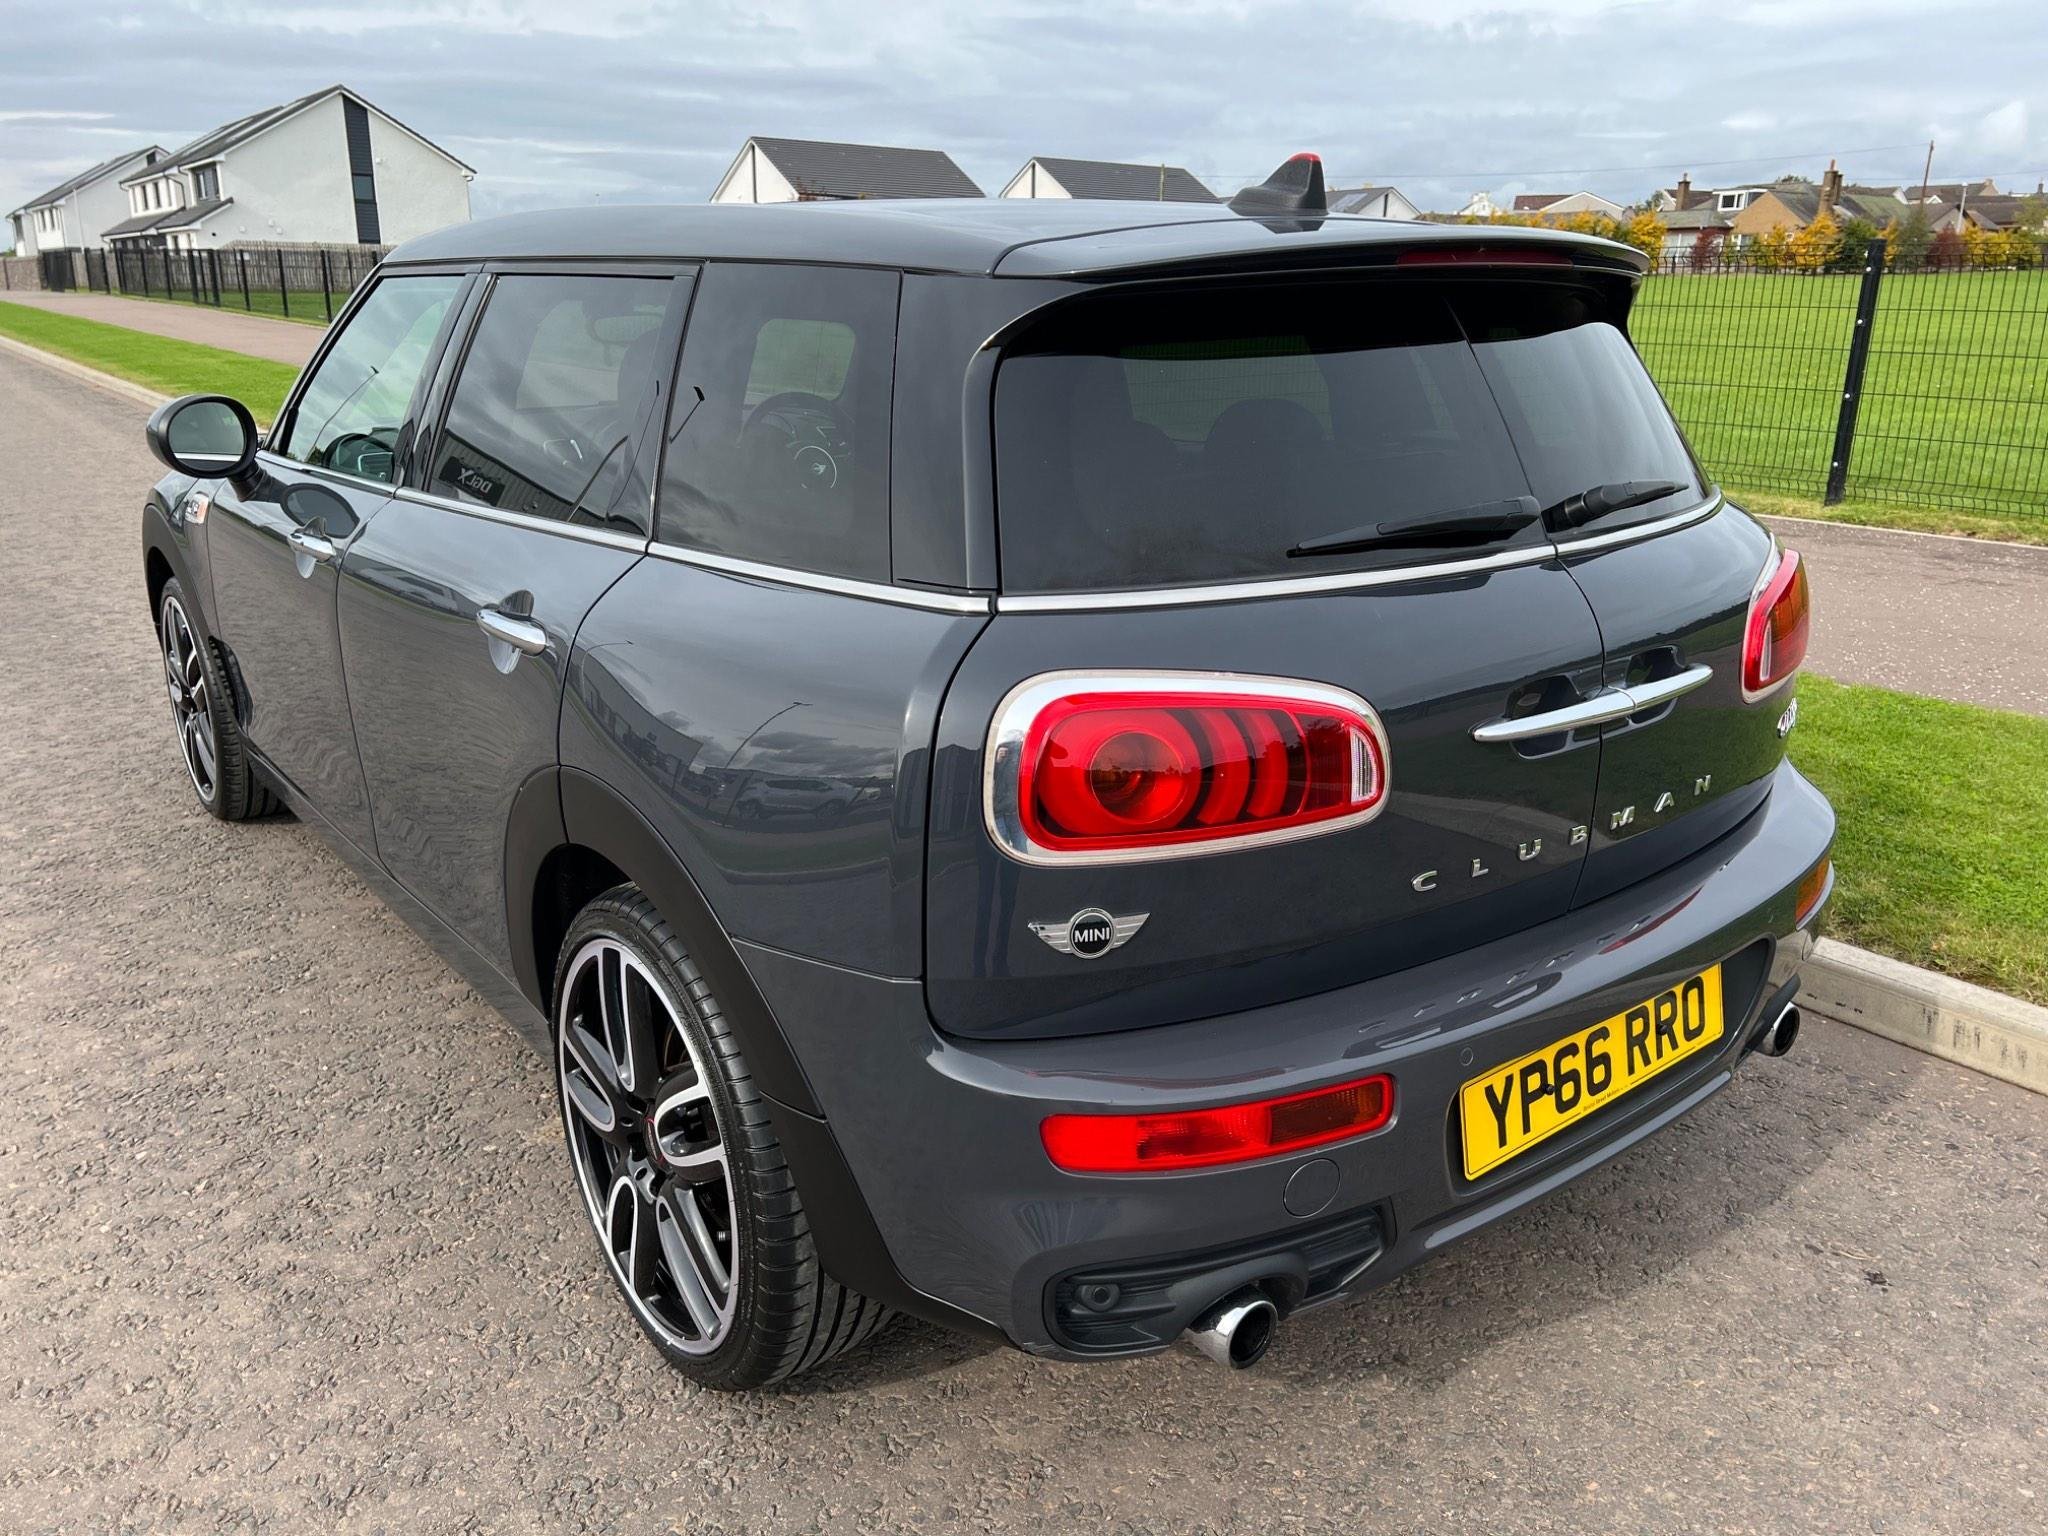 Used MINI Clubman 2.0 Cooper S Euro 6 (s/s) 6dr 2016 6dr Manual (YP66RRO)